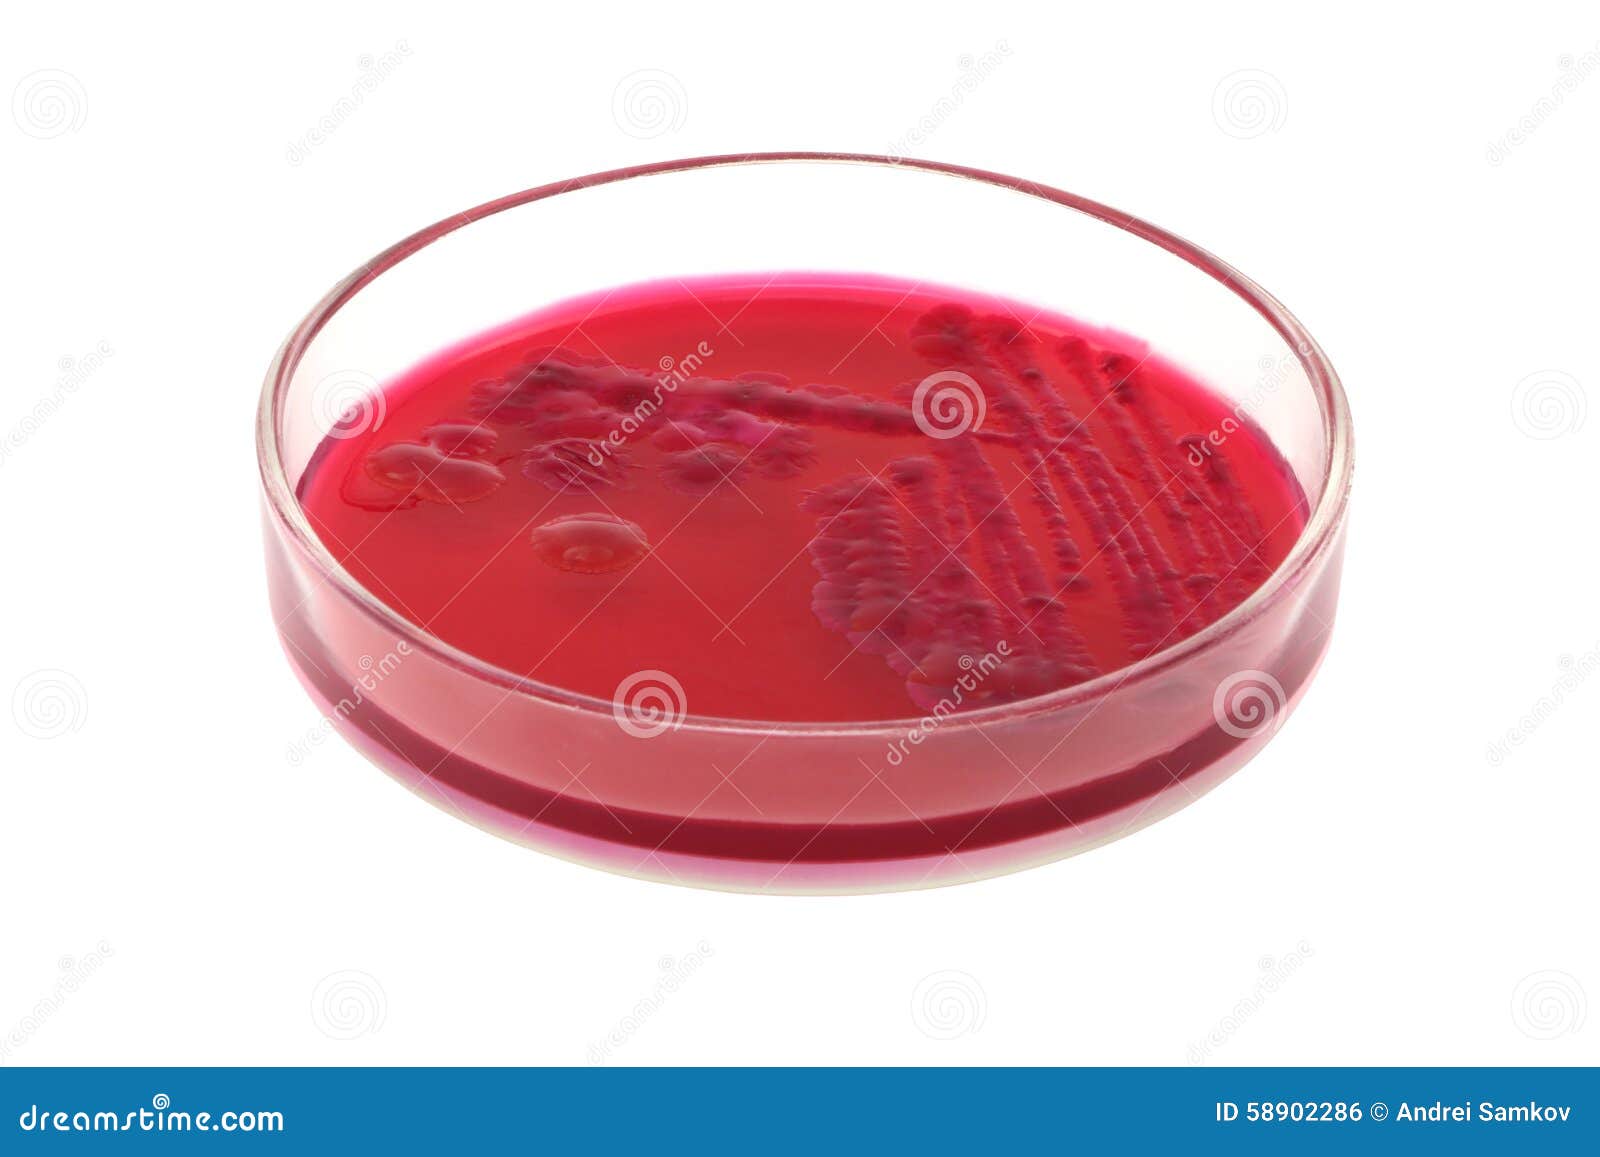 red bacterial colonies on petri dish red agar 